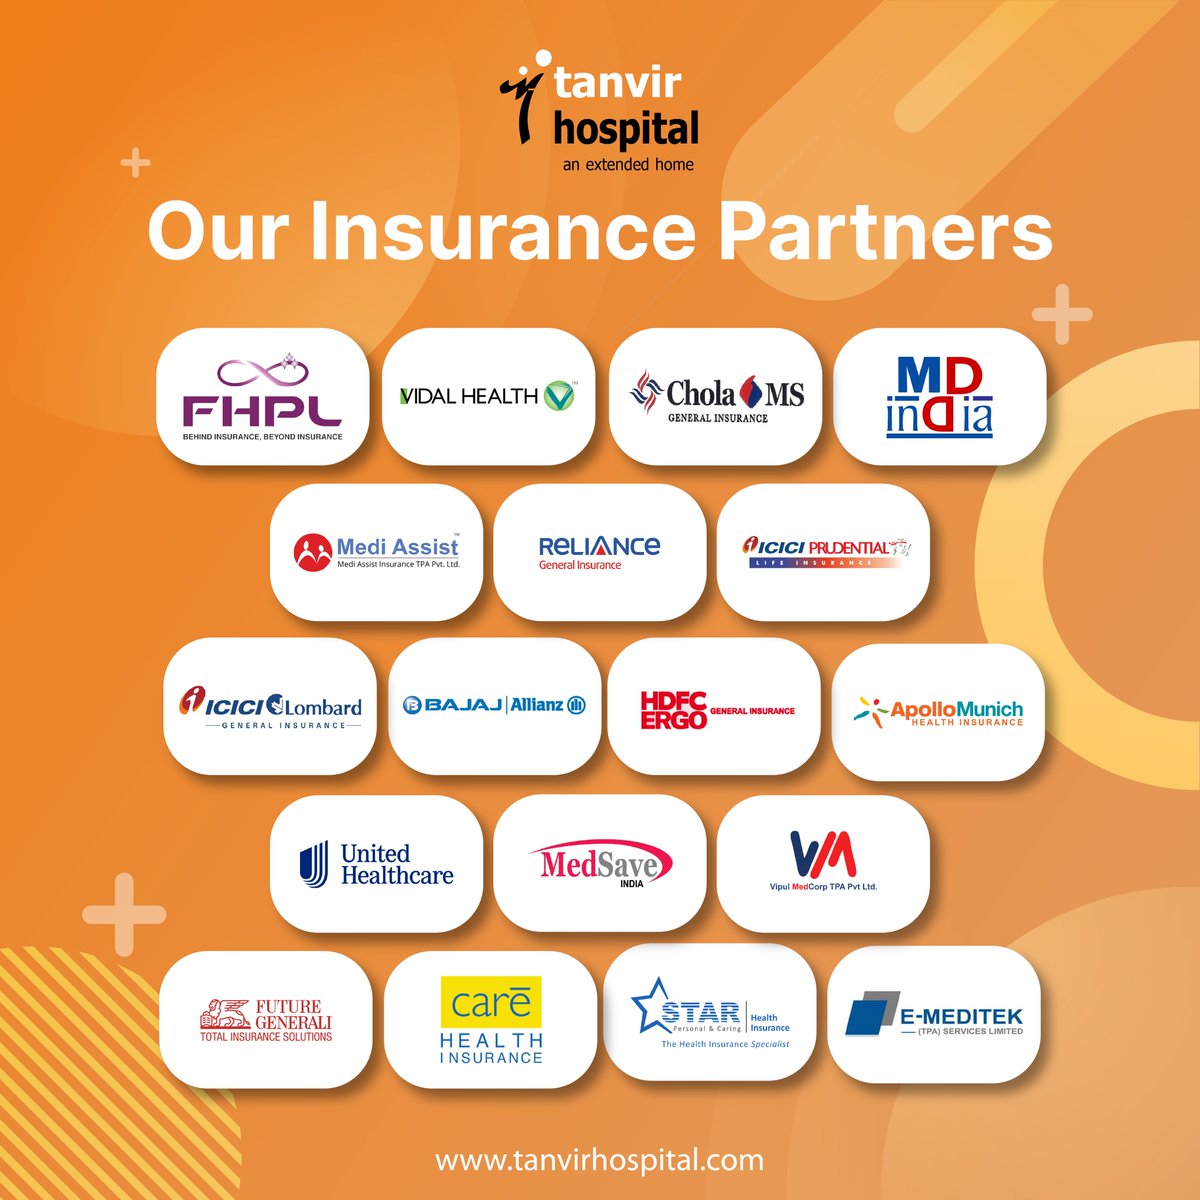 Affordable & Accessible #healthcare  for all! We've partnered with the top #insuranceproviders ensuring seamless, #cashless and hassle-free treatments for you and your loved ones.
#healthinsurance #insurancehealth #healthcareinsurance #healthinsuranceforall #tanvirhospital